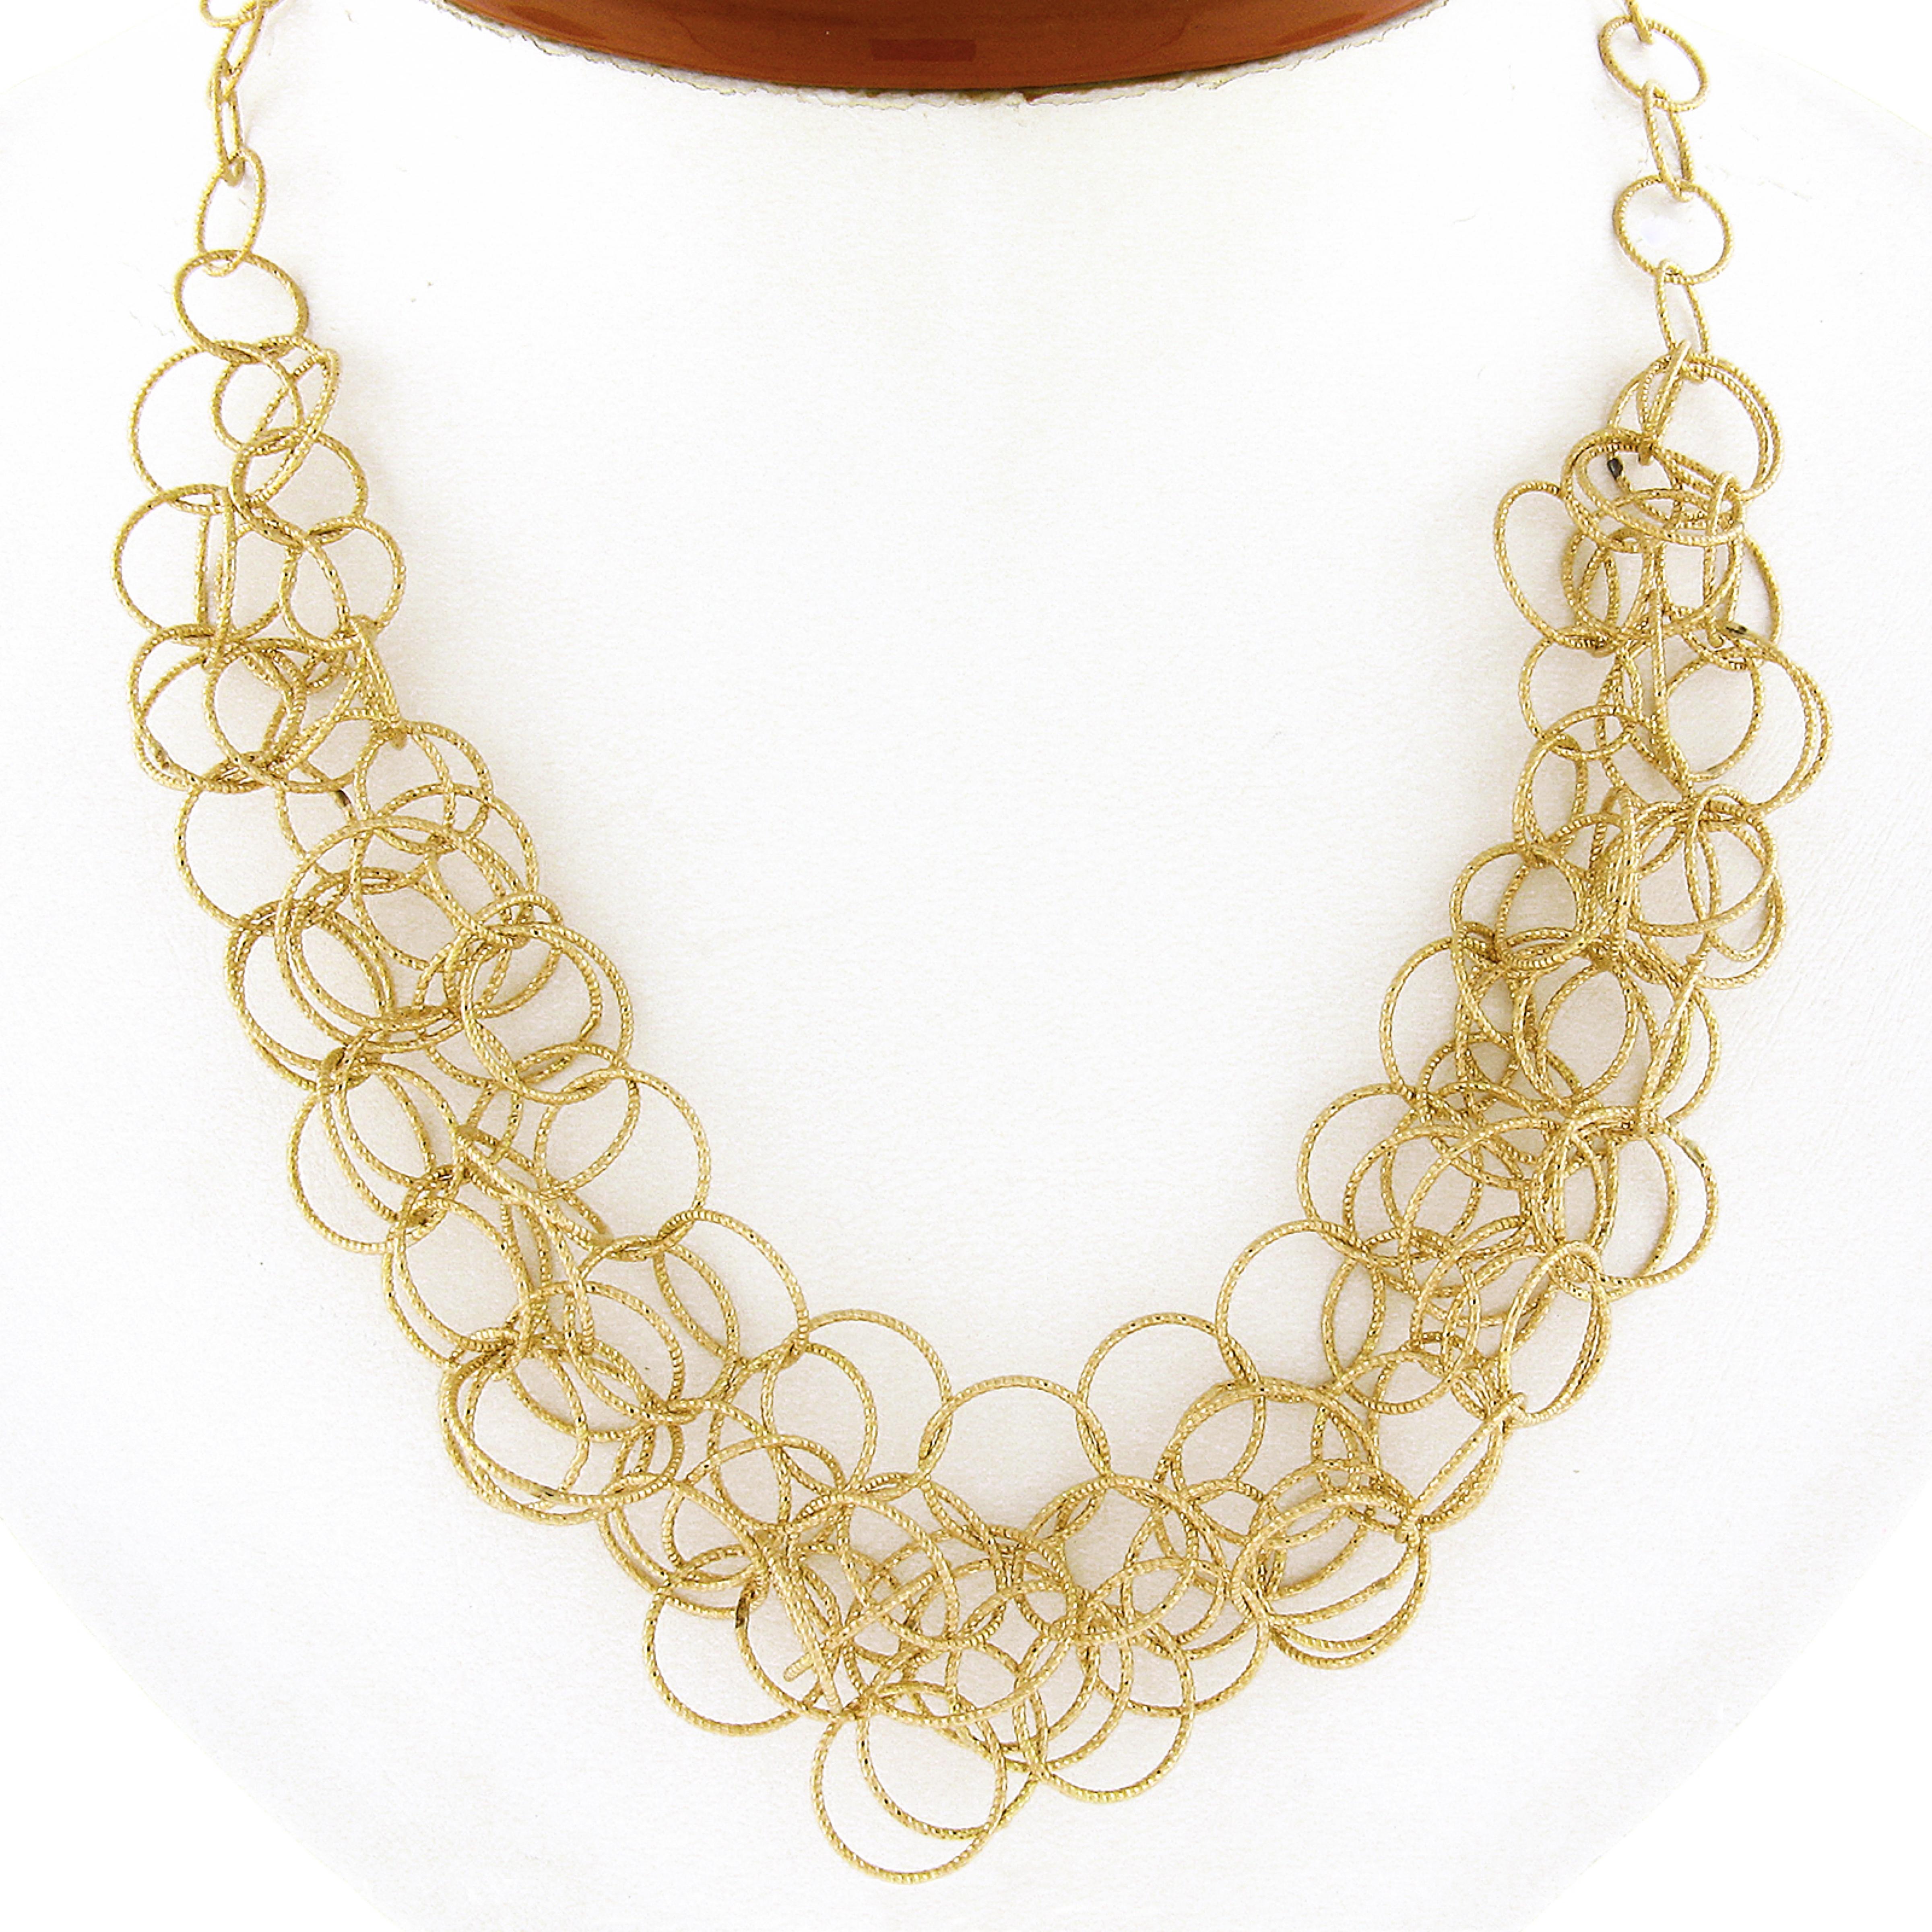 This fancy Roberto Coin chain necklace was crafted in Italy from solid 18k yellow gold and features a beautiful mauresque style constructed from interlocking textured round links throughout. These fancy links have a super shiny and attractive look